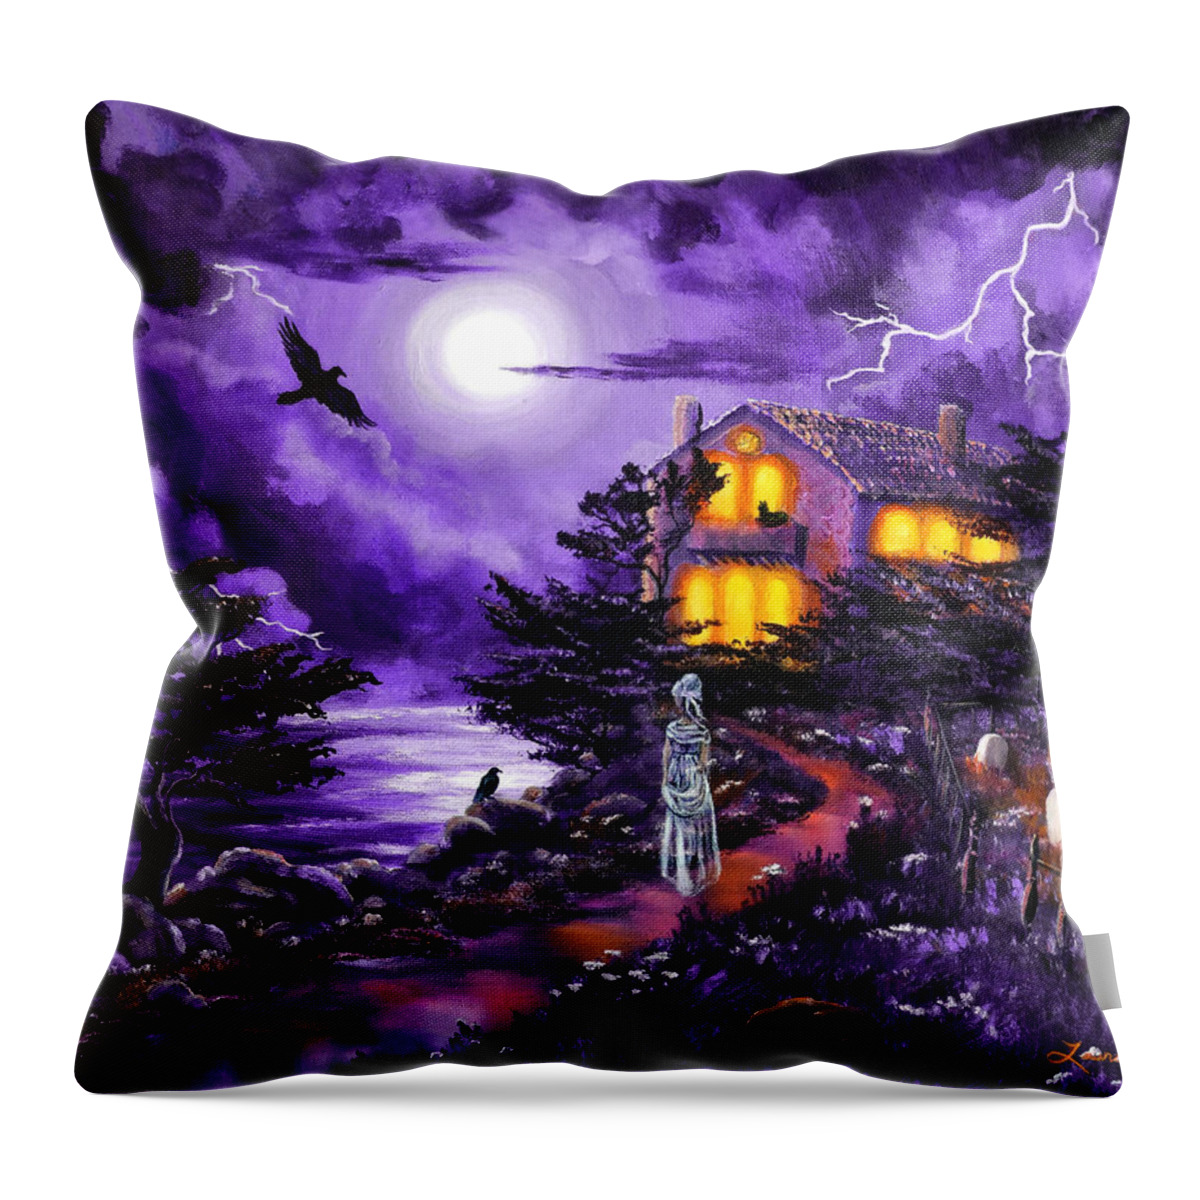 Dark Art Throw Pillow featuring the painting The Night's Plutonian Shore by Laura Iverson